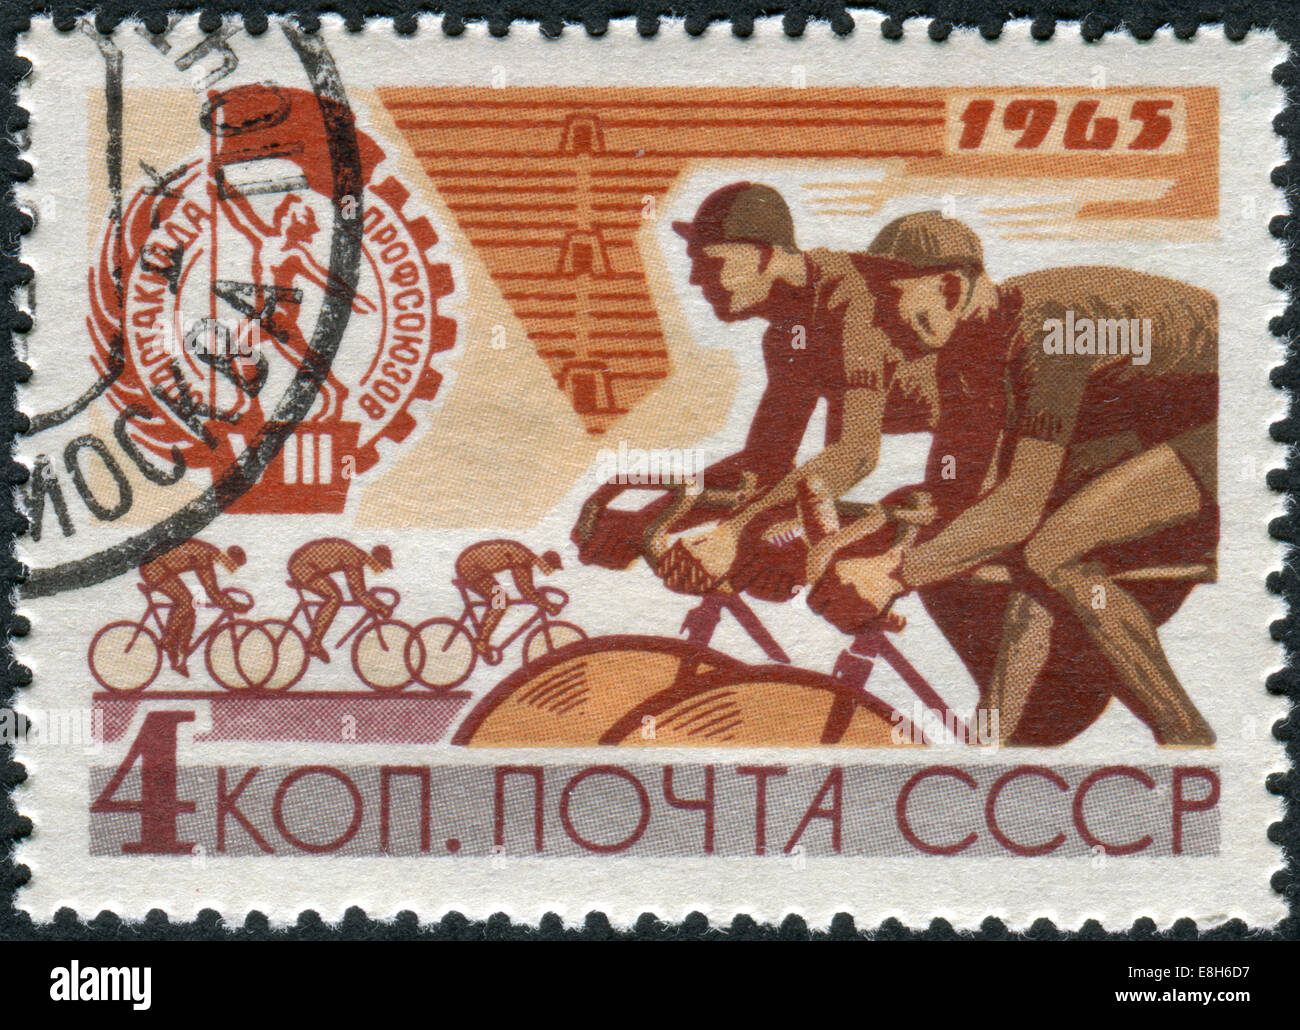 Postage stamp printed in USSR, devoted to the 8th Trade Unions Summer Games (Spartakiad), shows cycling Stock Photo